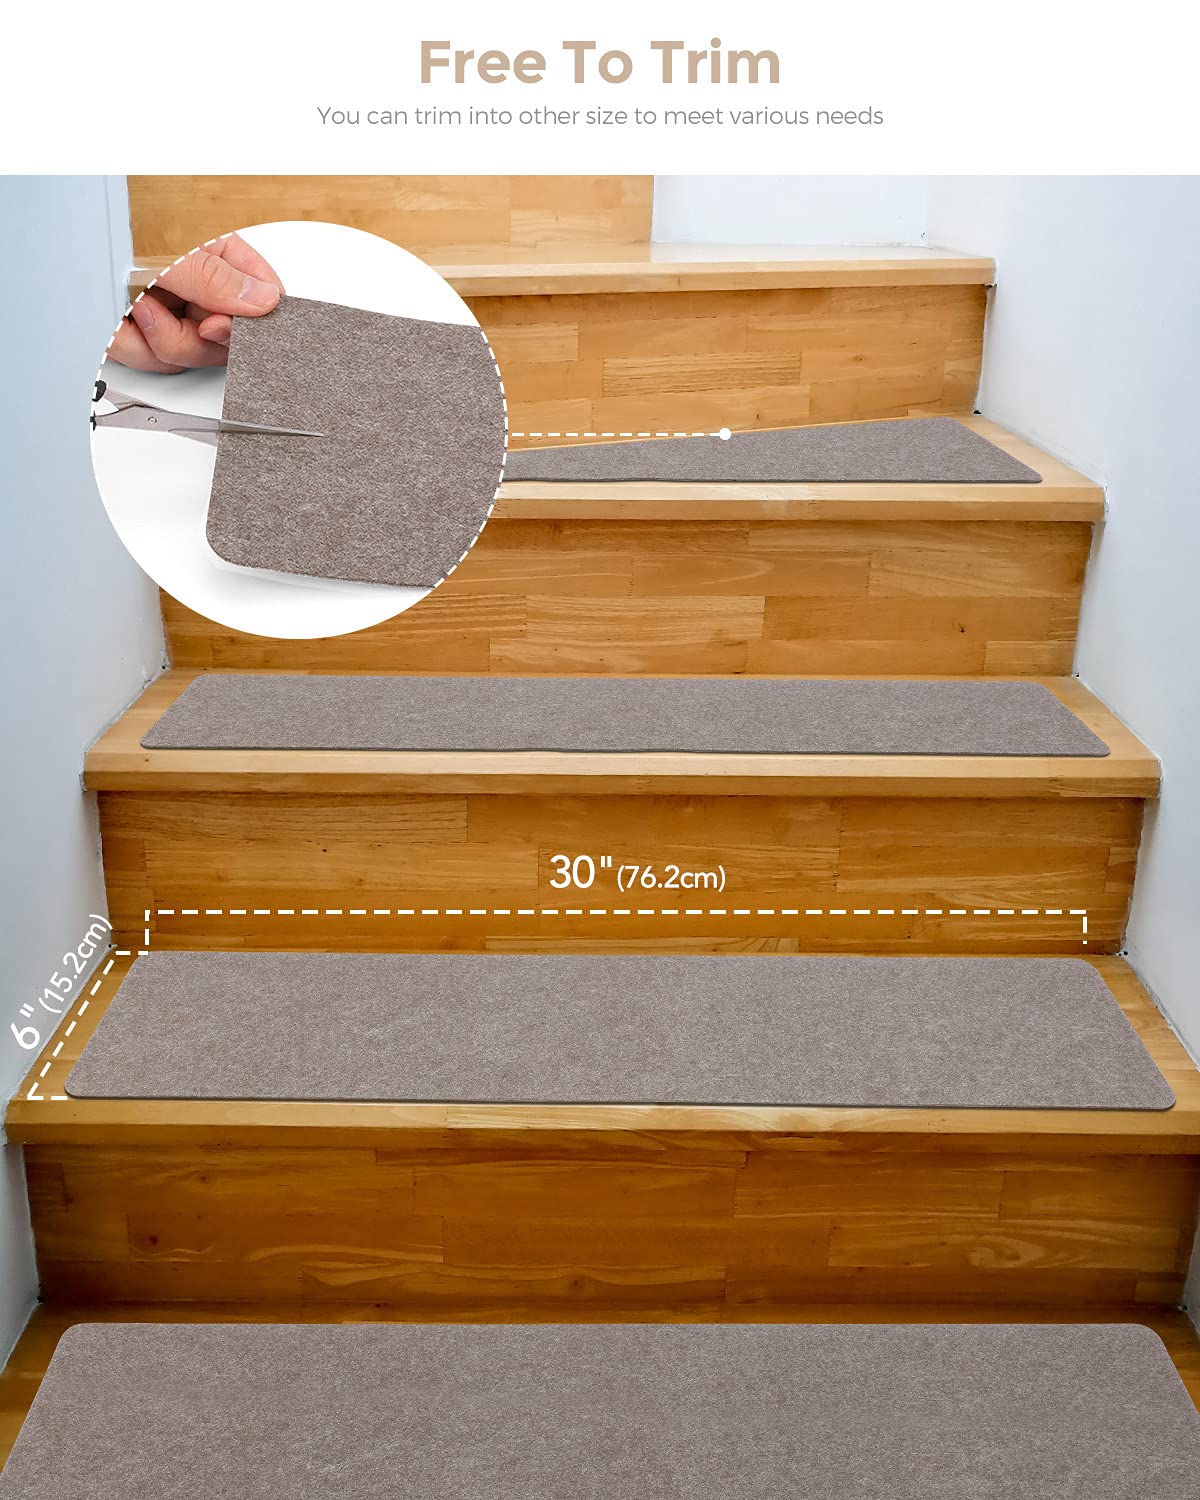 Antdle Stair Treads Non-Slip Carpet Indoor Set of 14 Black Carpet Stair  Tread Treads Stair Rugs Mats Rubber Backing (30 x 8 inch),(Bla